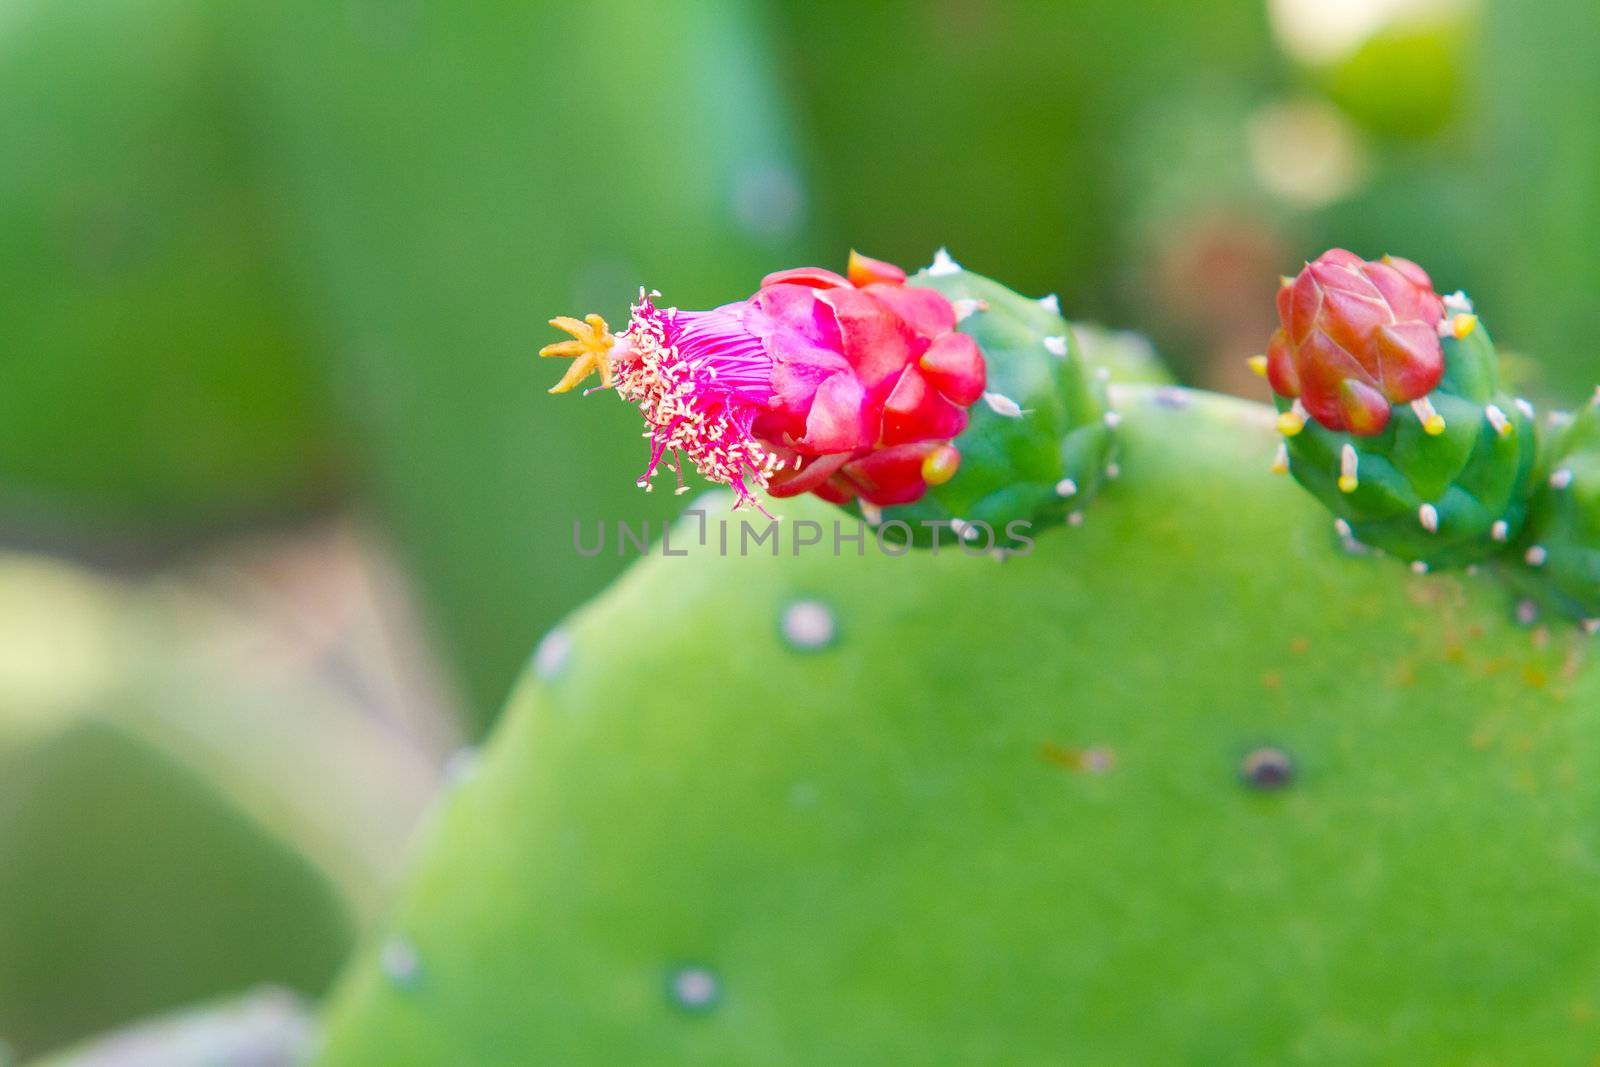 Cactus with Blossoms by joshuaraineyphotography